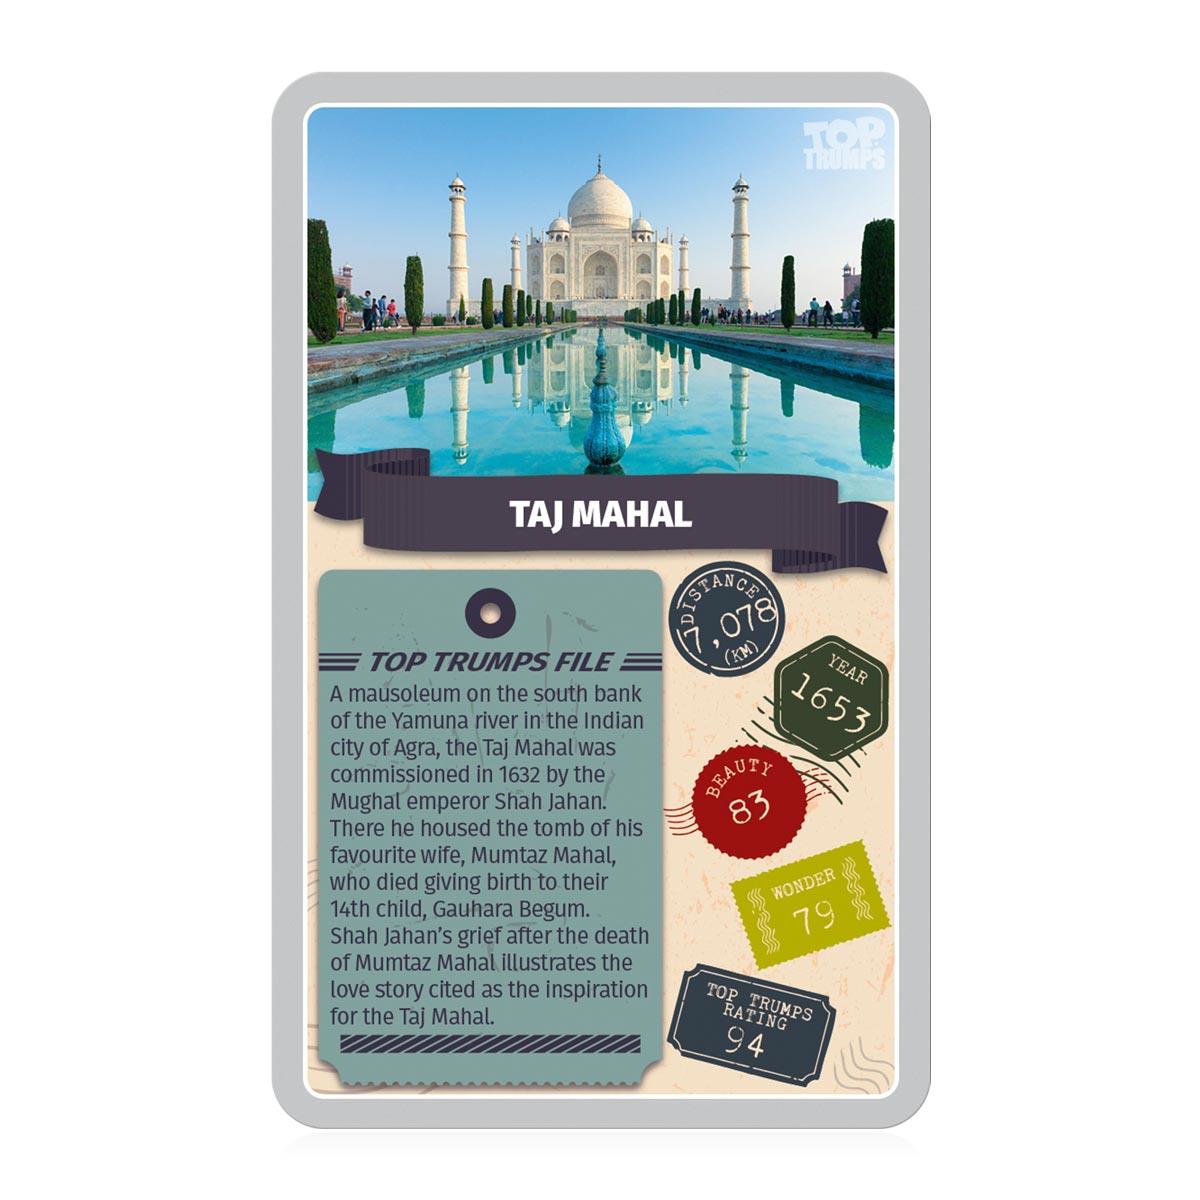 Monuments of the World Top Trumps Card Game